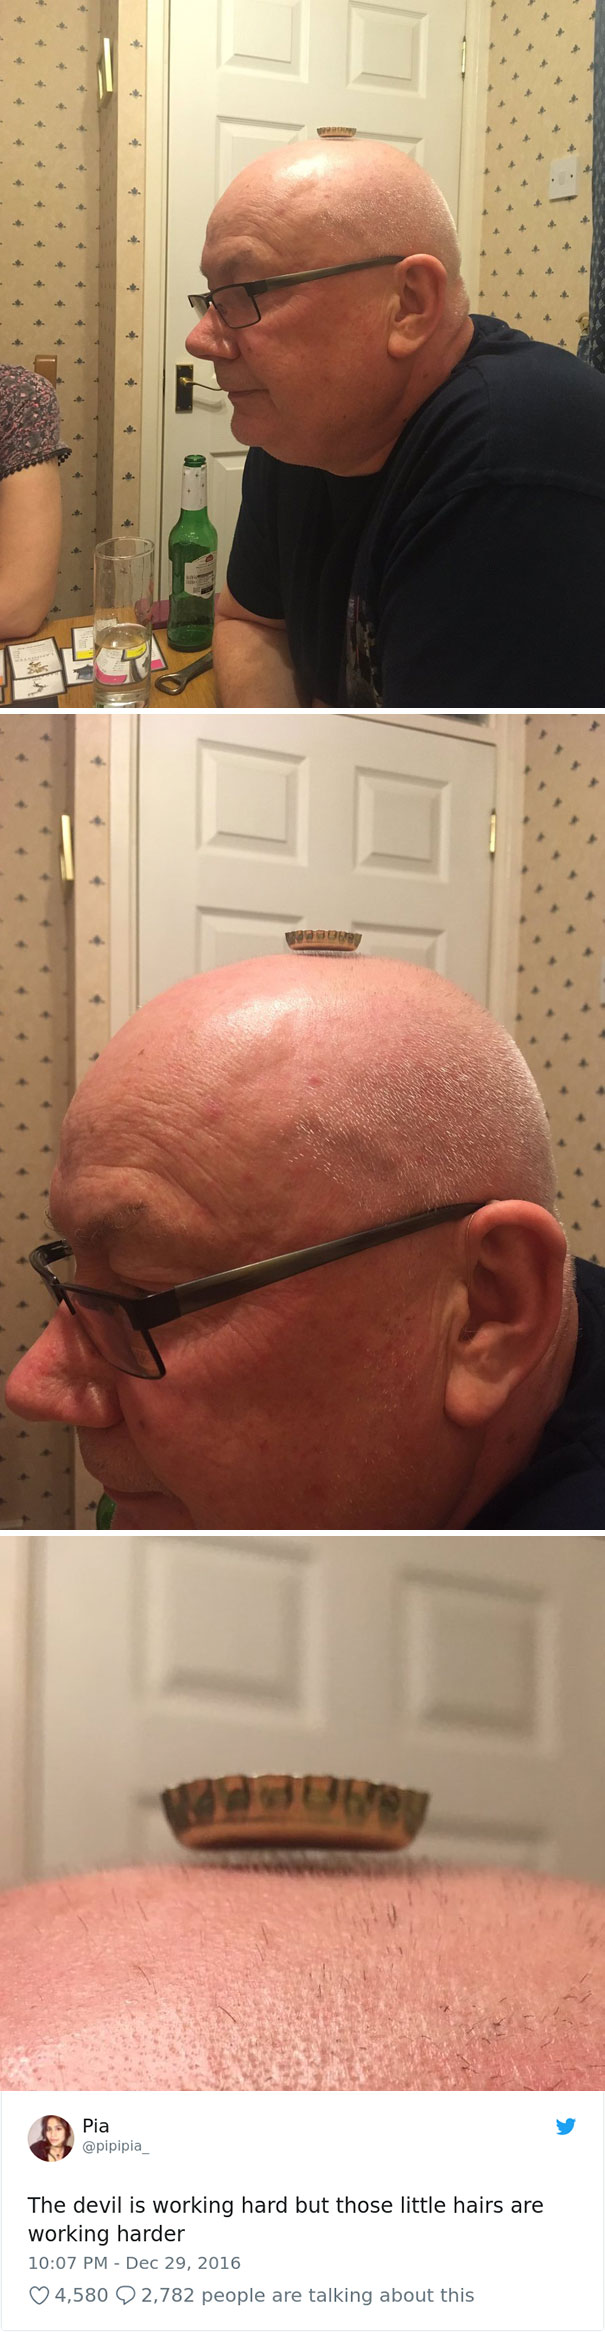 Dad Proving He Hasn't Lost All His Hair